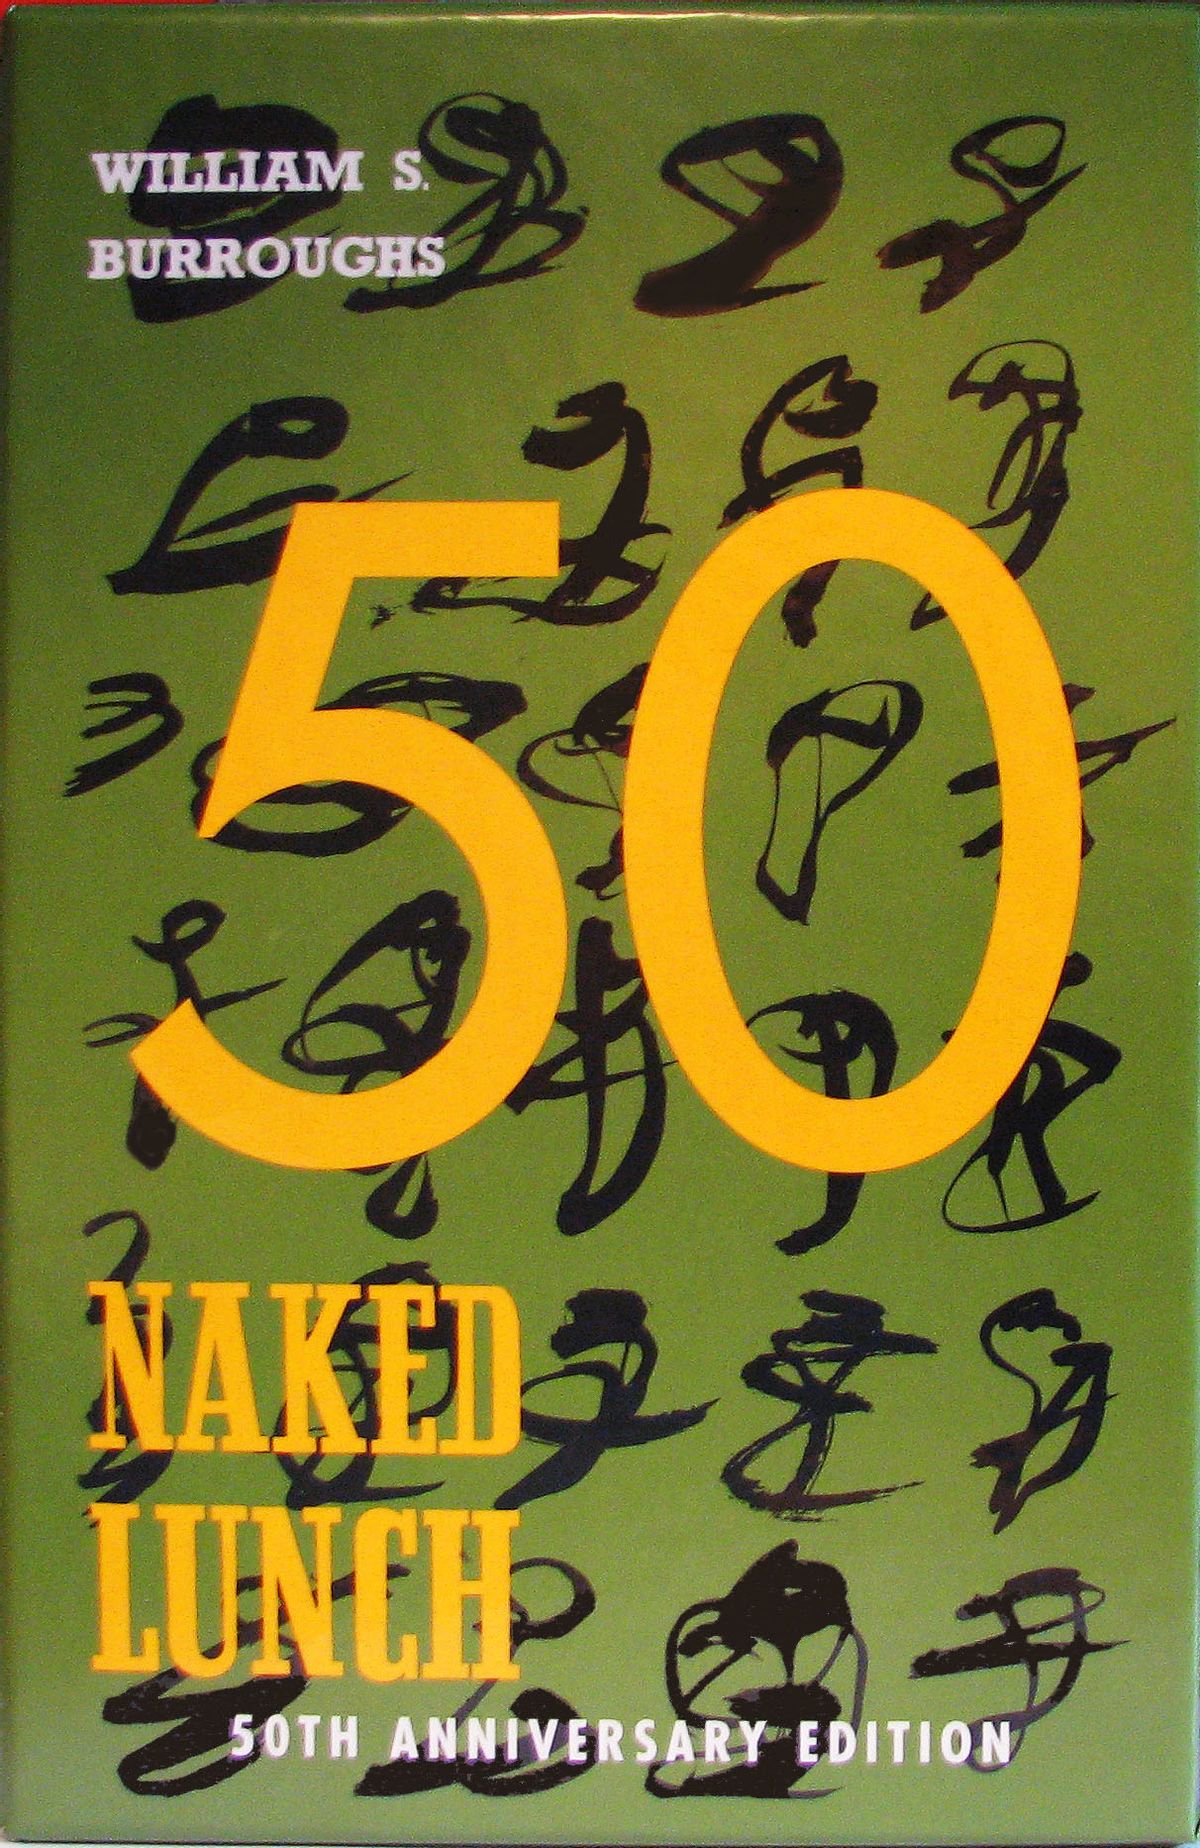 "Naked Lunch: 50th Anniversary Edition"